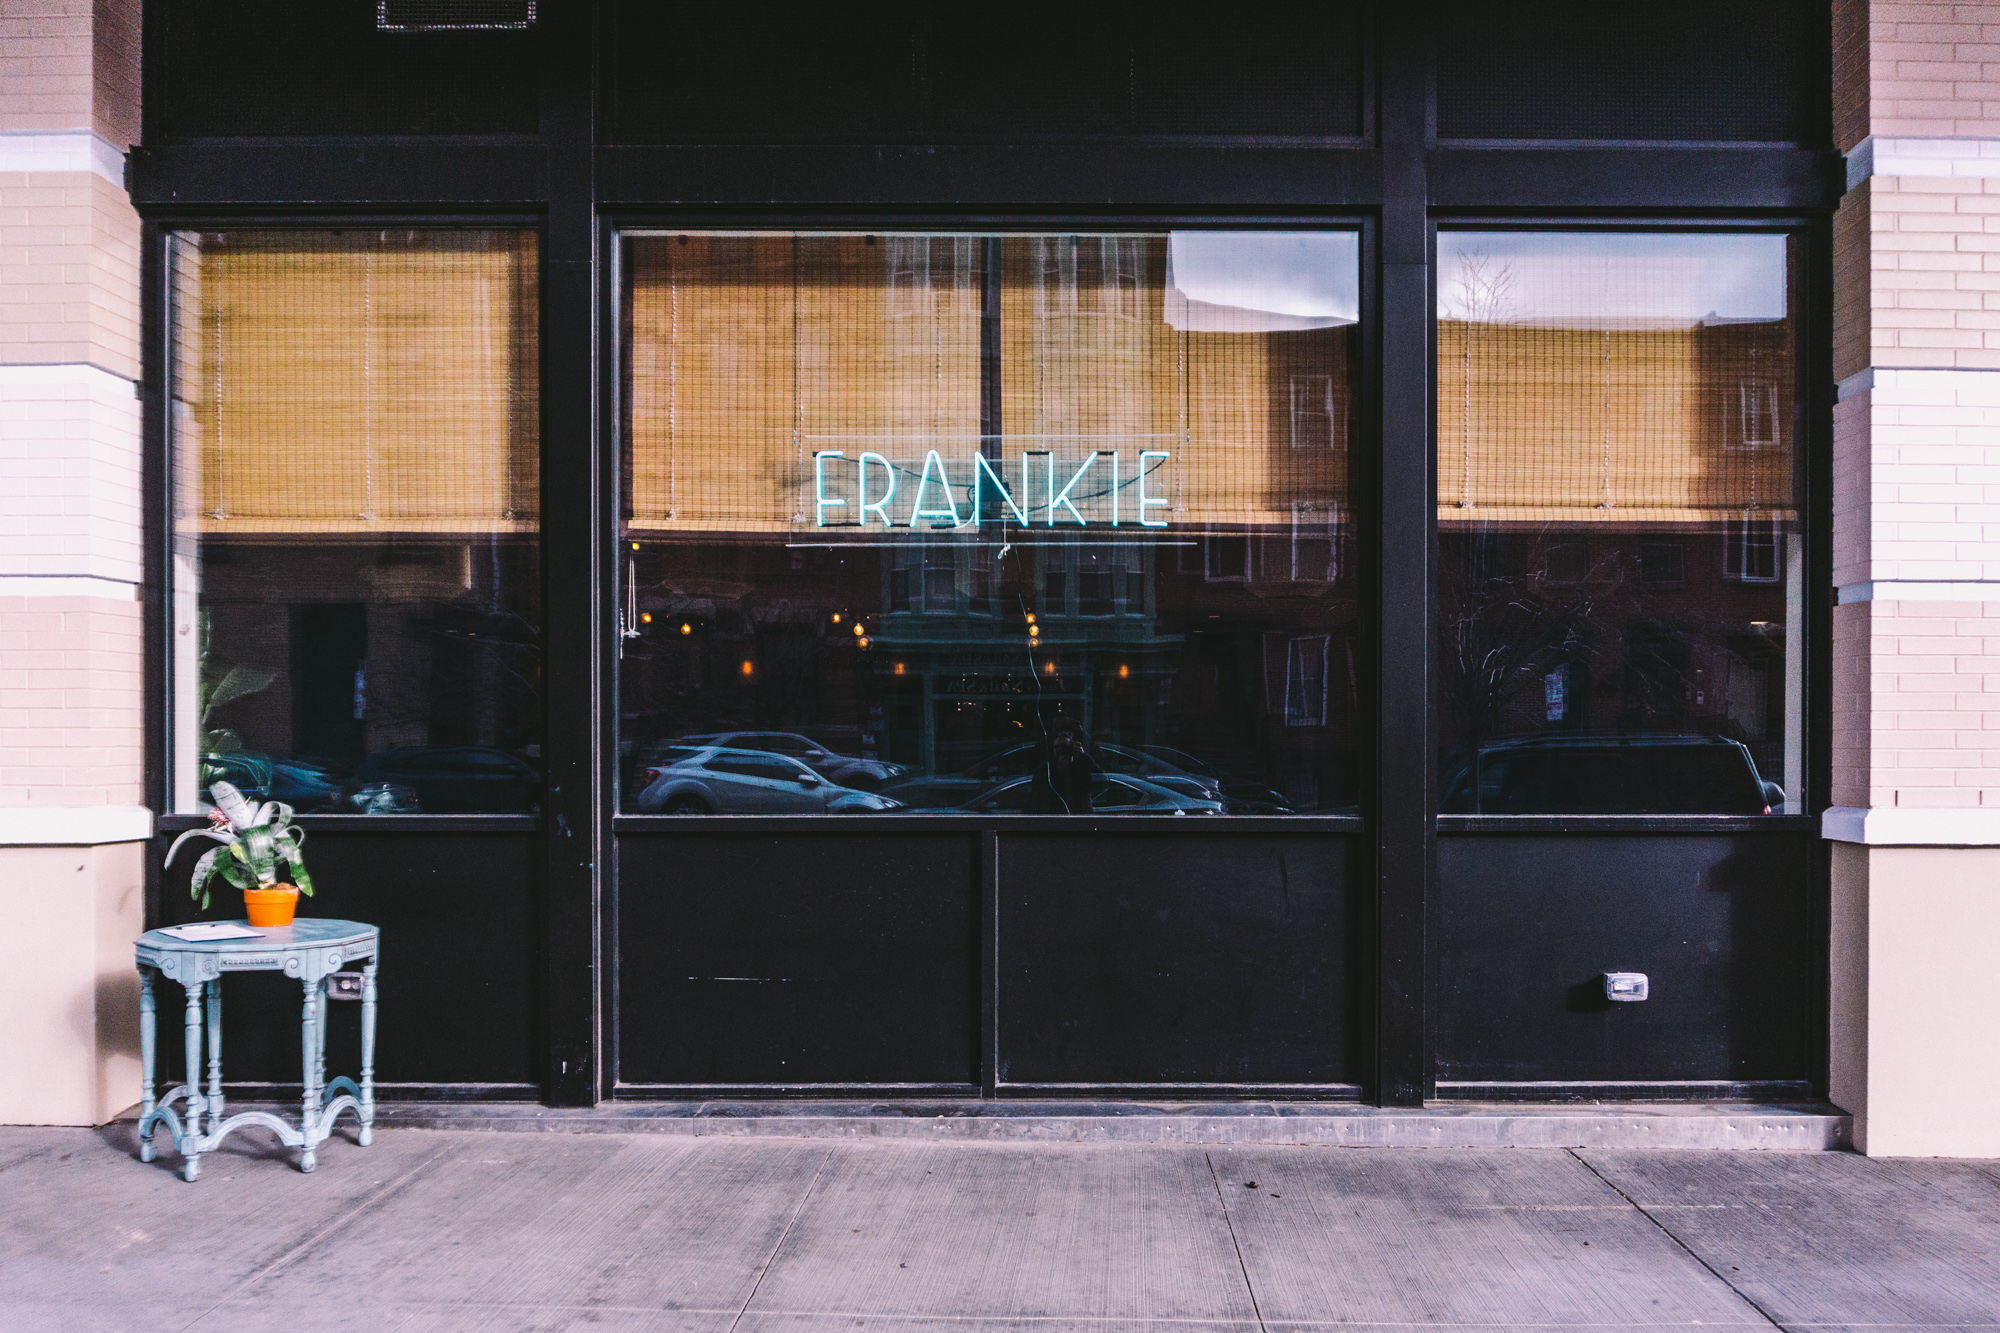 Neon signage at Frankie